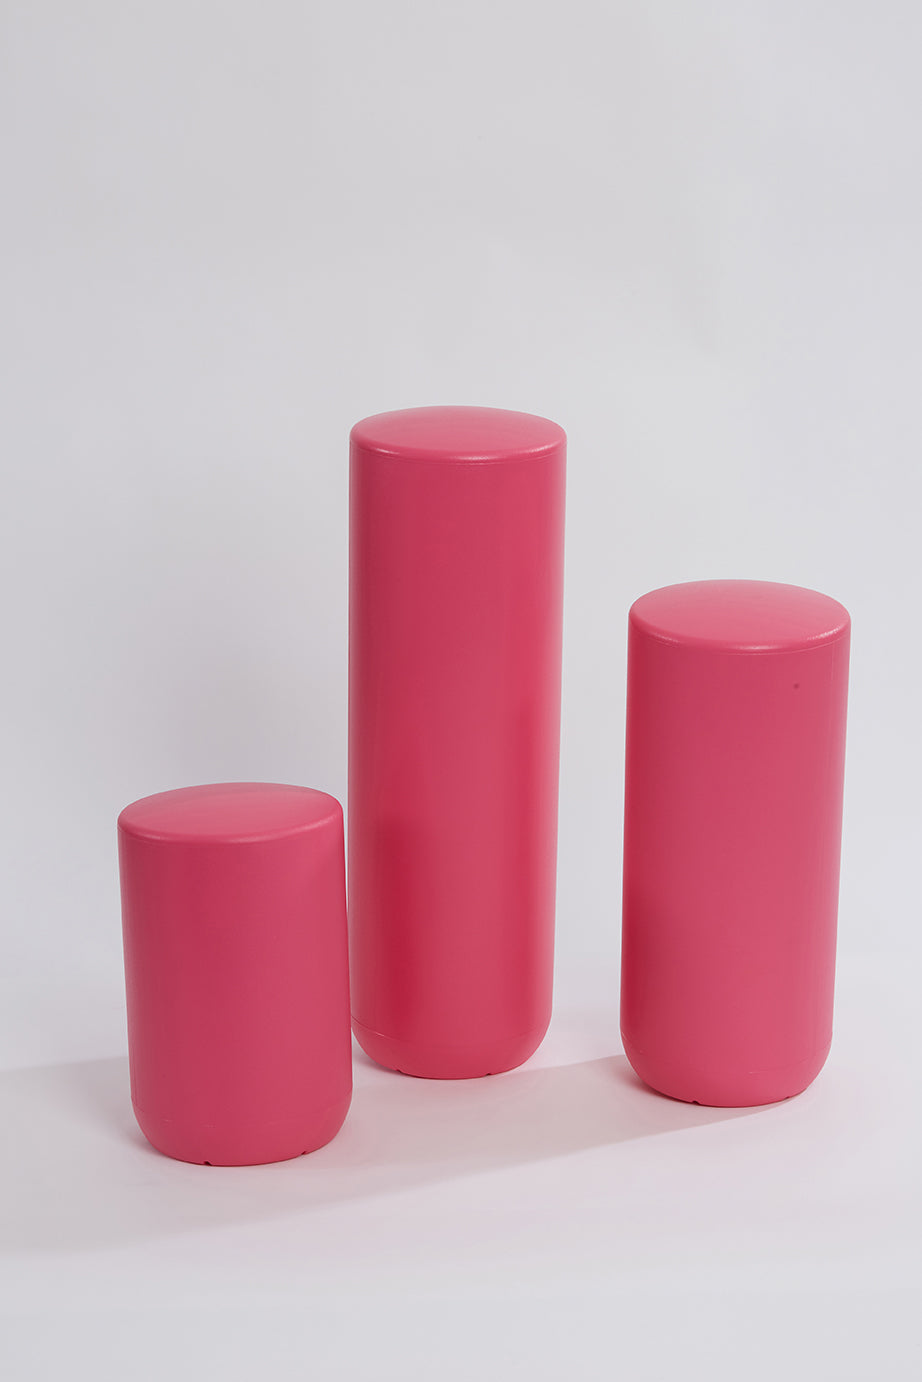 Plastic stool, perch, tubular, group, and pink colour